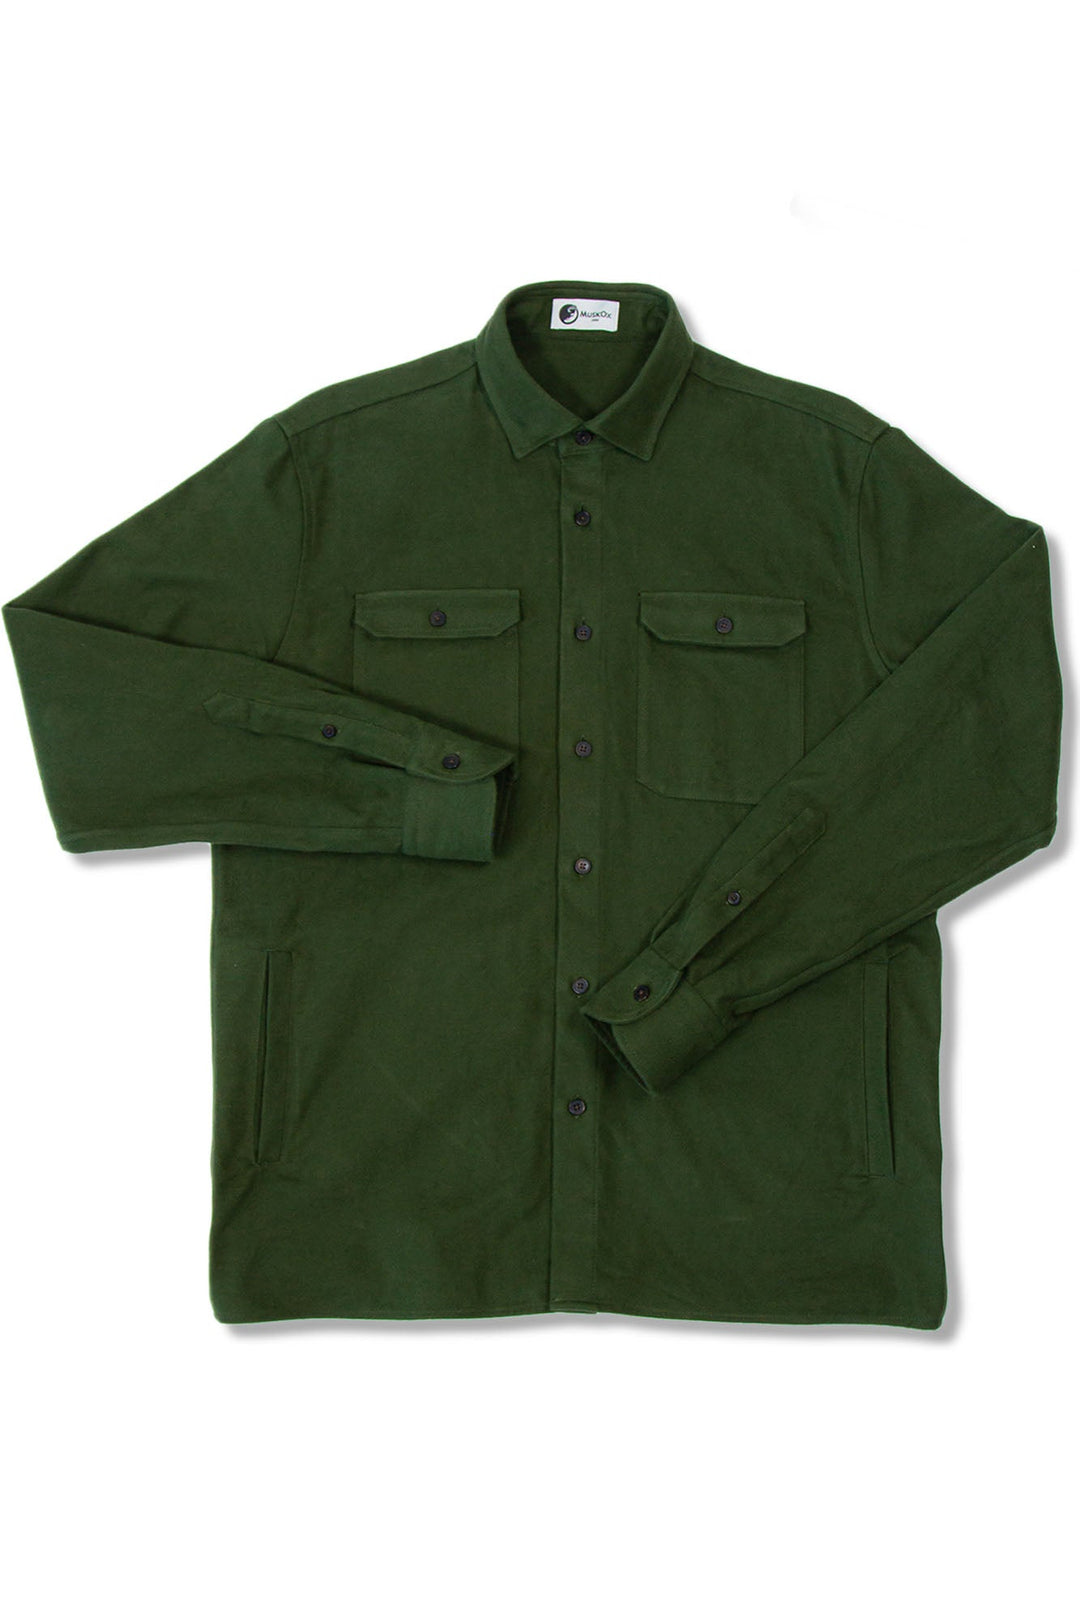 MuskOx Clothing The Yukon Flannel Shirt Jacket, Green. Green Flannel Shirt Jacket. 100% Cotton, Durable Flannel Shirt. Our flannels are made of a heavy duty cotton twill with a soft brushed finish so you can be prepared for any adventure without sacrificing comfort. Since we want you to be built for every occasion, we've included two secure chest pockets and side pockets for you to bring your vitals along.